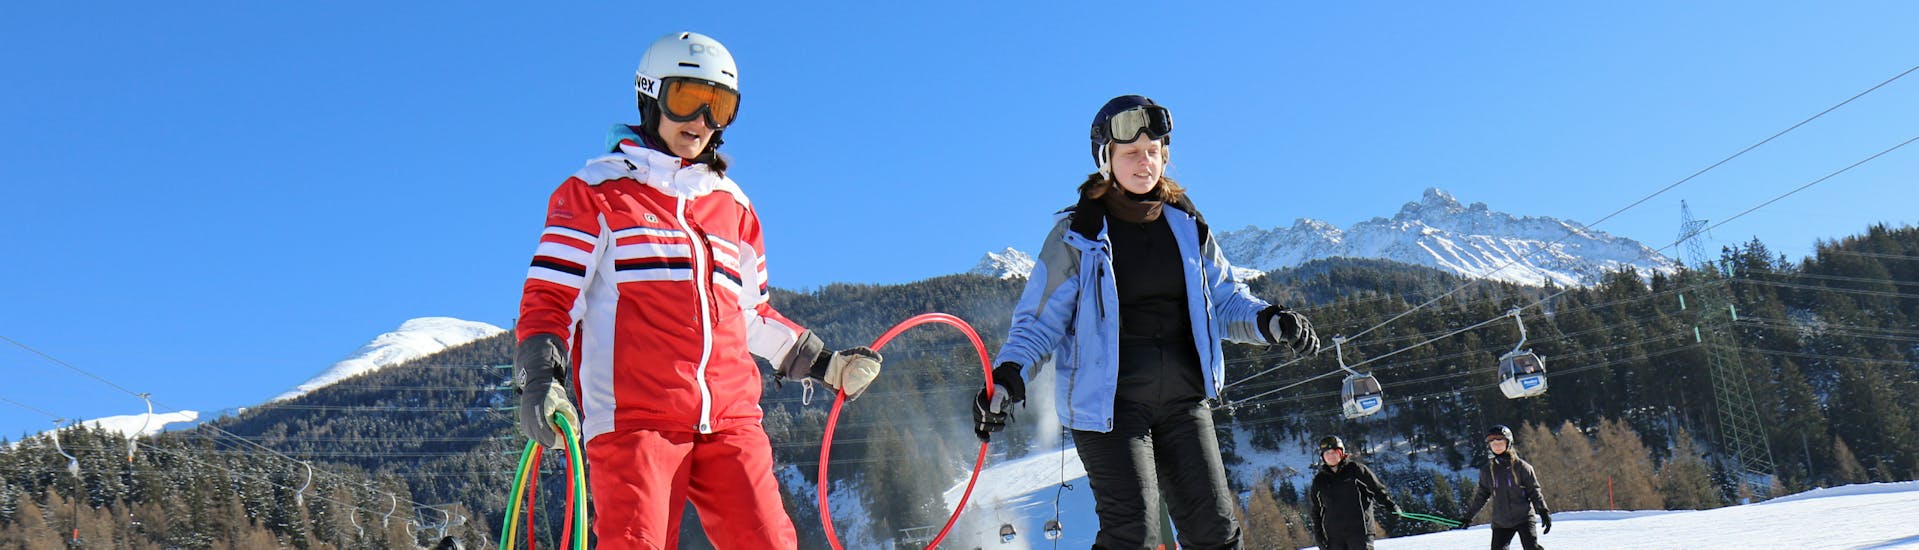 Private Ski Lessons for Adults in Serfaus-Fiss-Ladis with Skischule Pfunds  - Hero image